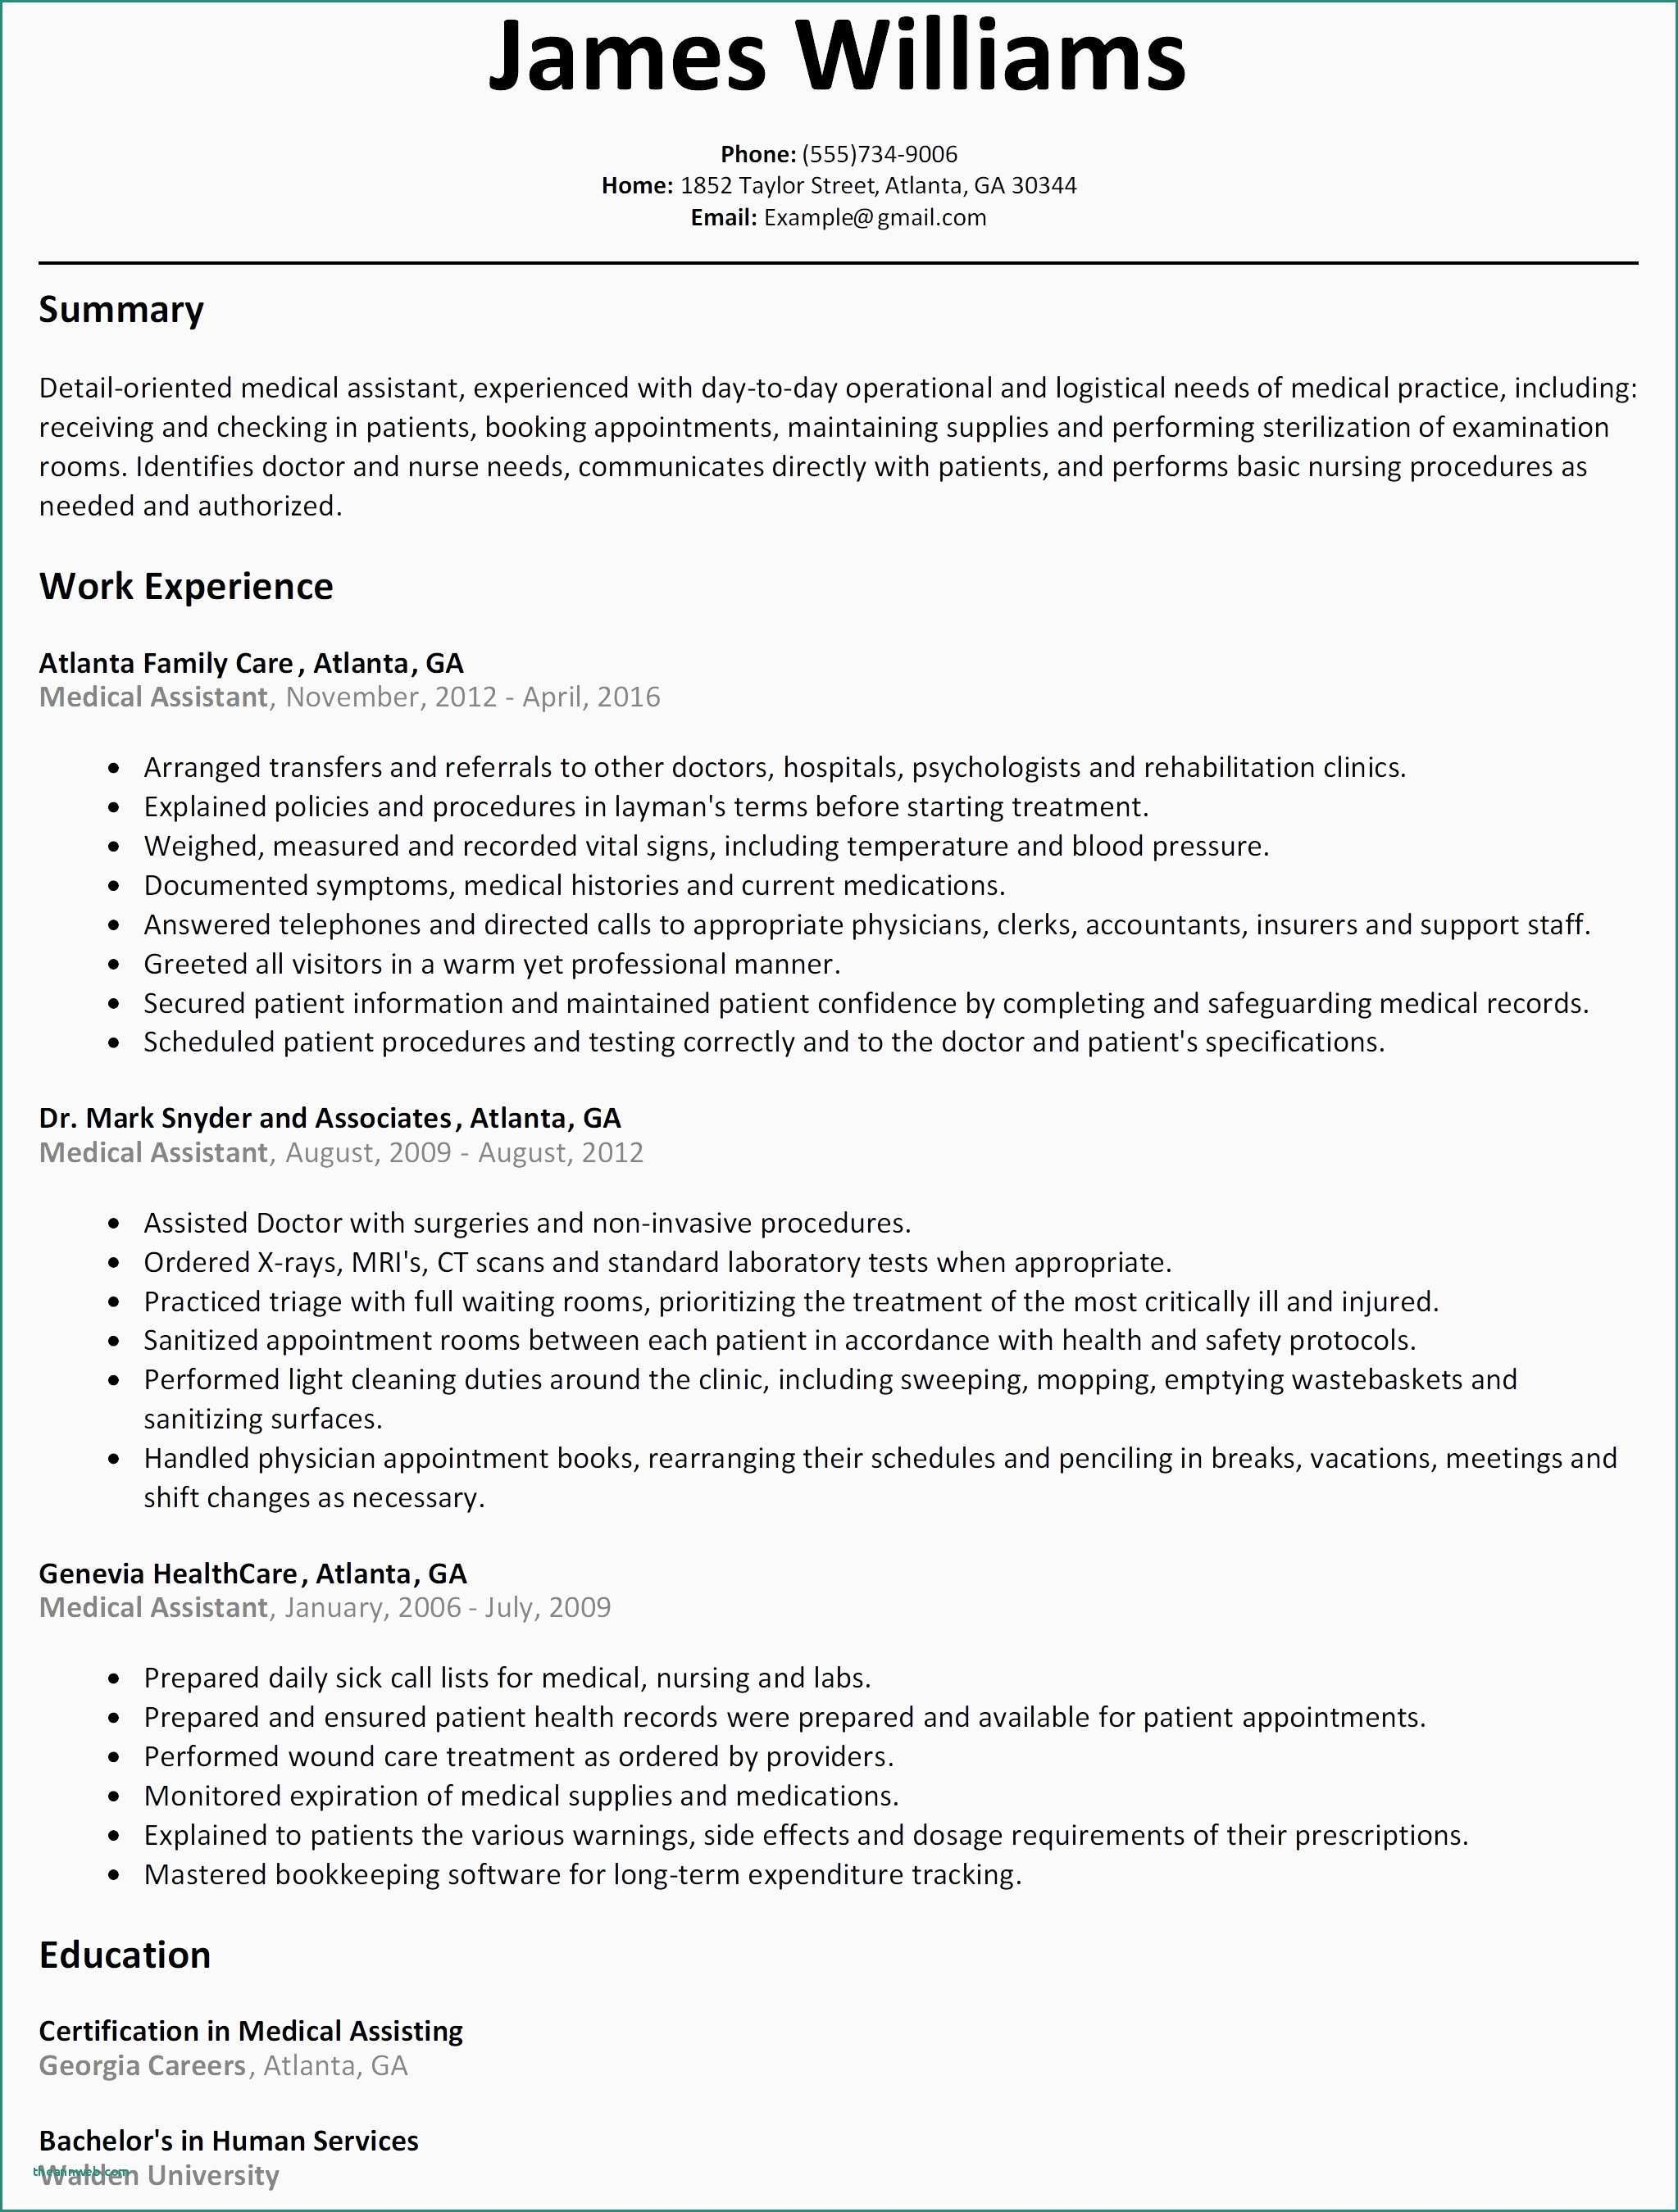 Resume Tips Objective Carpenter Resume Objective Resume Examples Word Beautiful Lead